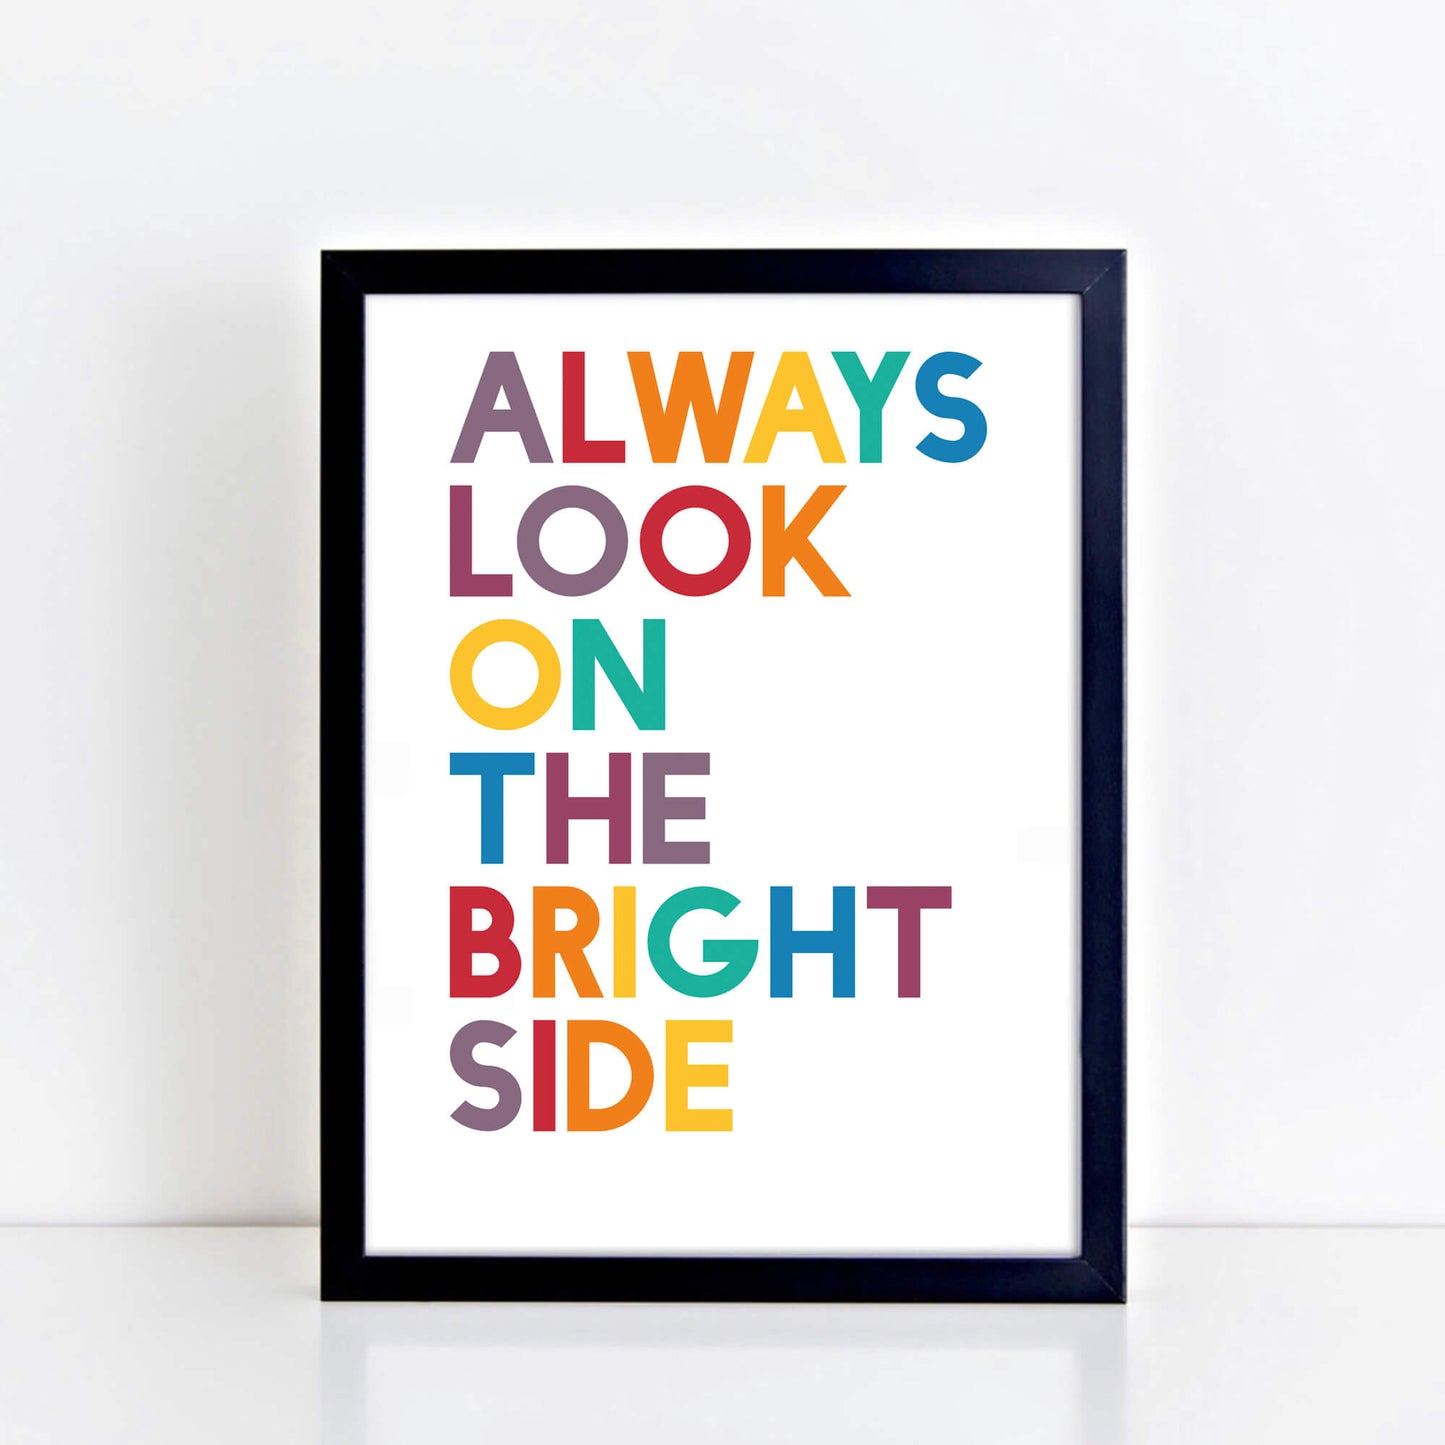 Always Look On The Bright Side Print by SixElevenCreations. Product Code SEP0214